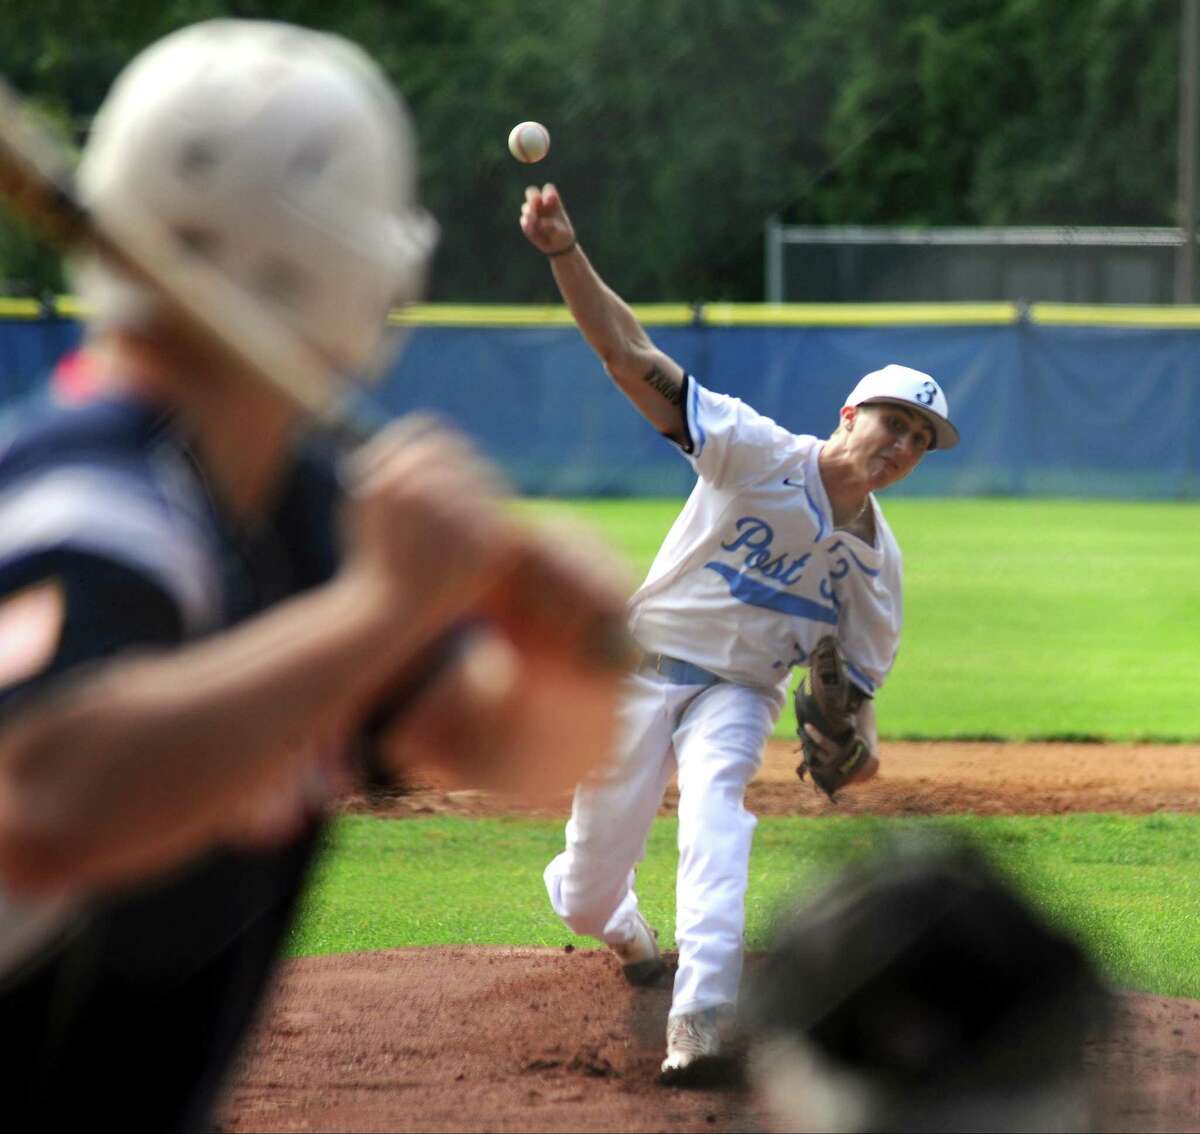 Stamford Post 3 pitcher Aaron D'Annolfo delivers a throw against Greenwich Cannons in the first inning of a Senior American Legion Baseball game at Cubeta Stadium on Saturday, July 1, 2017 in Stamford, Connecticut. Greenwich won 9-7.